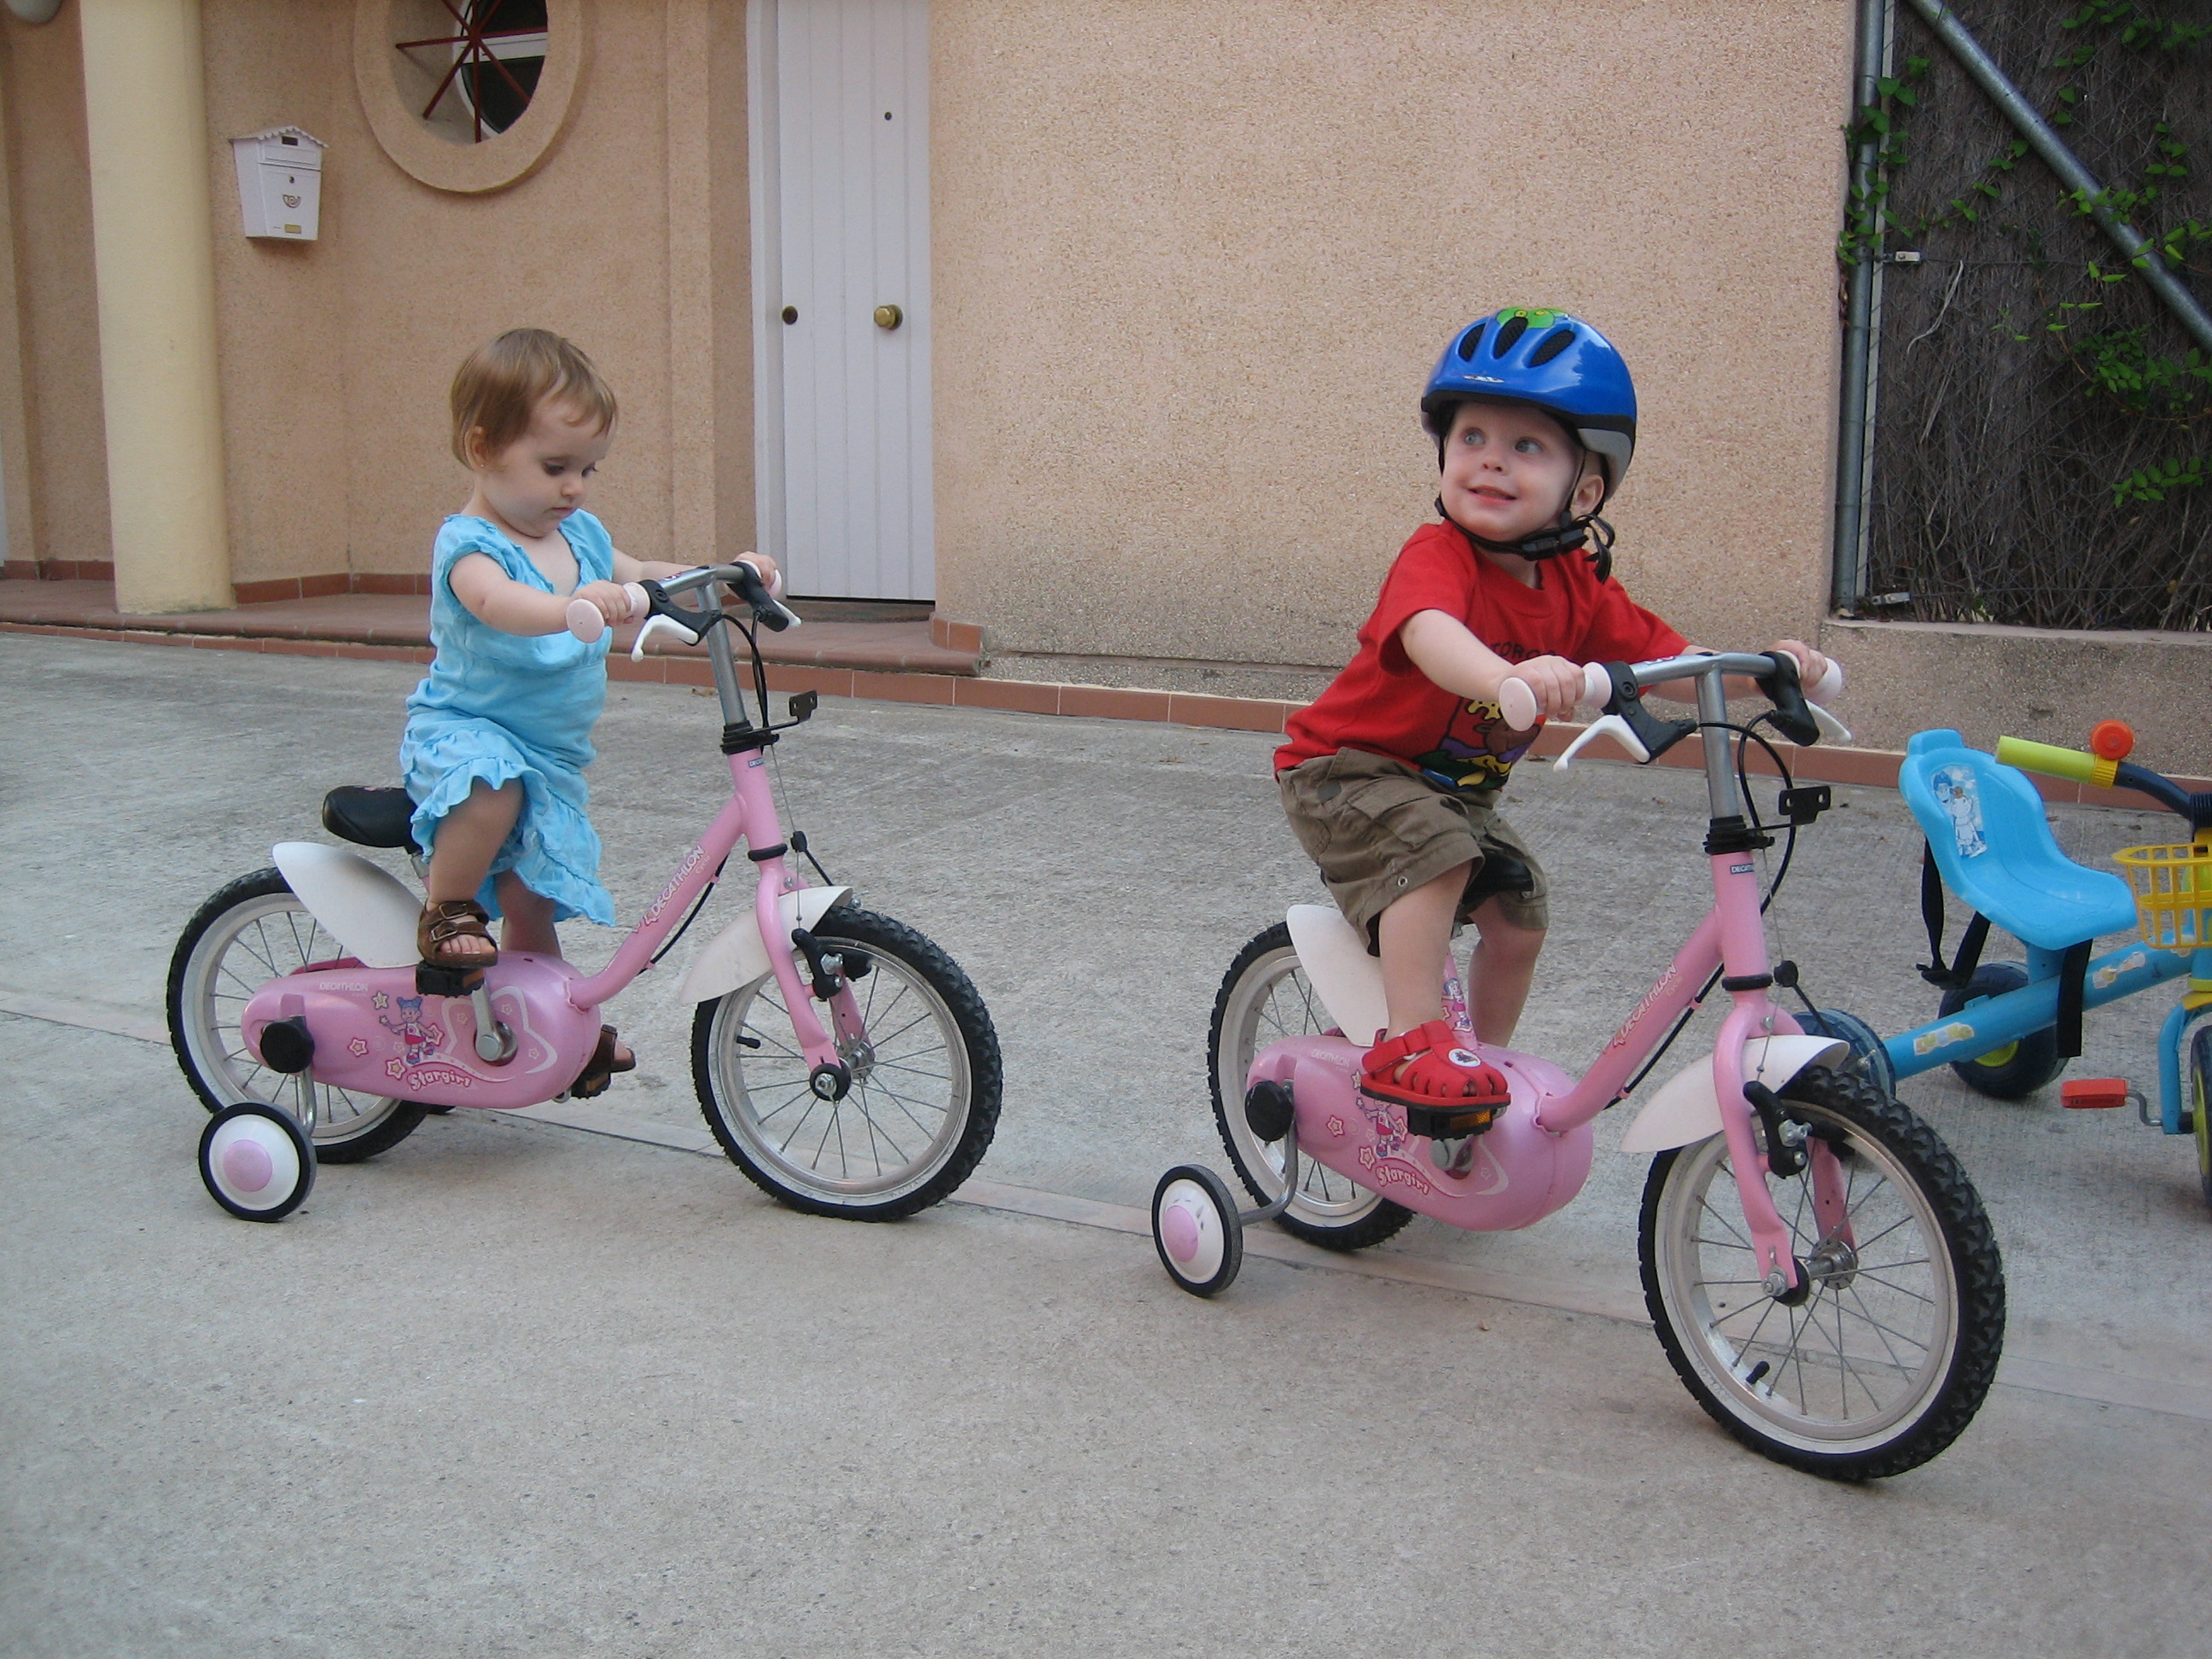 Look what we found, matching pink bikes!